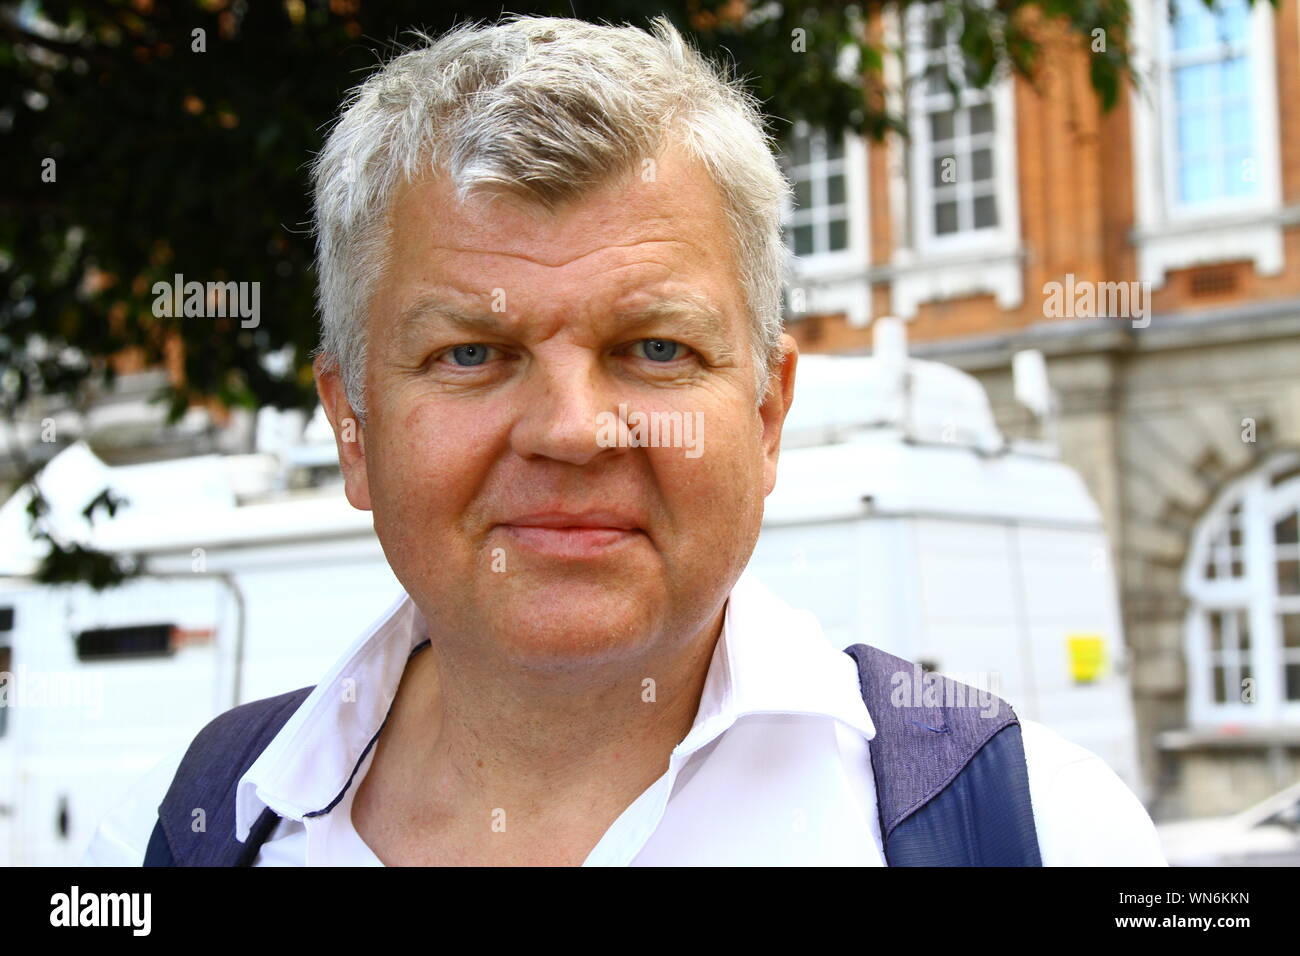 ADRIAN CHILES JOURNALIST AND RADIO PRESENTER PICTURED AT COLLEGE GREEN, WESTMINSTER, LONDON,UK ON 5TH SEPTEMBER 2019. RADIO 5 LIVE. BBC ONE SHOW. BBC SPORTS PRESENTER. BBC RADIO 5 LIVE. THE ONE SHOW WITH CHRISTINE LAMPARD. BROADCASTERS. TV PRESENTERS. AUTHOR. WEST BROMWICH ALBION FOOTBALL SUPPORTER AND CHARITY WORKER. Russell Moore portfolio page. Stock Photo